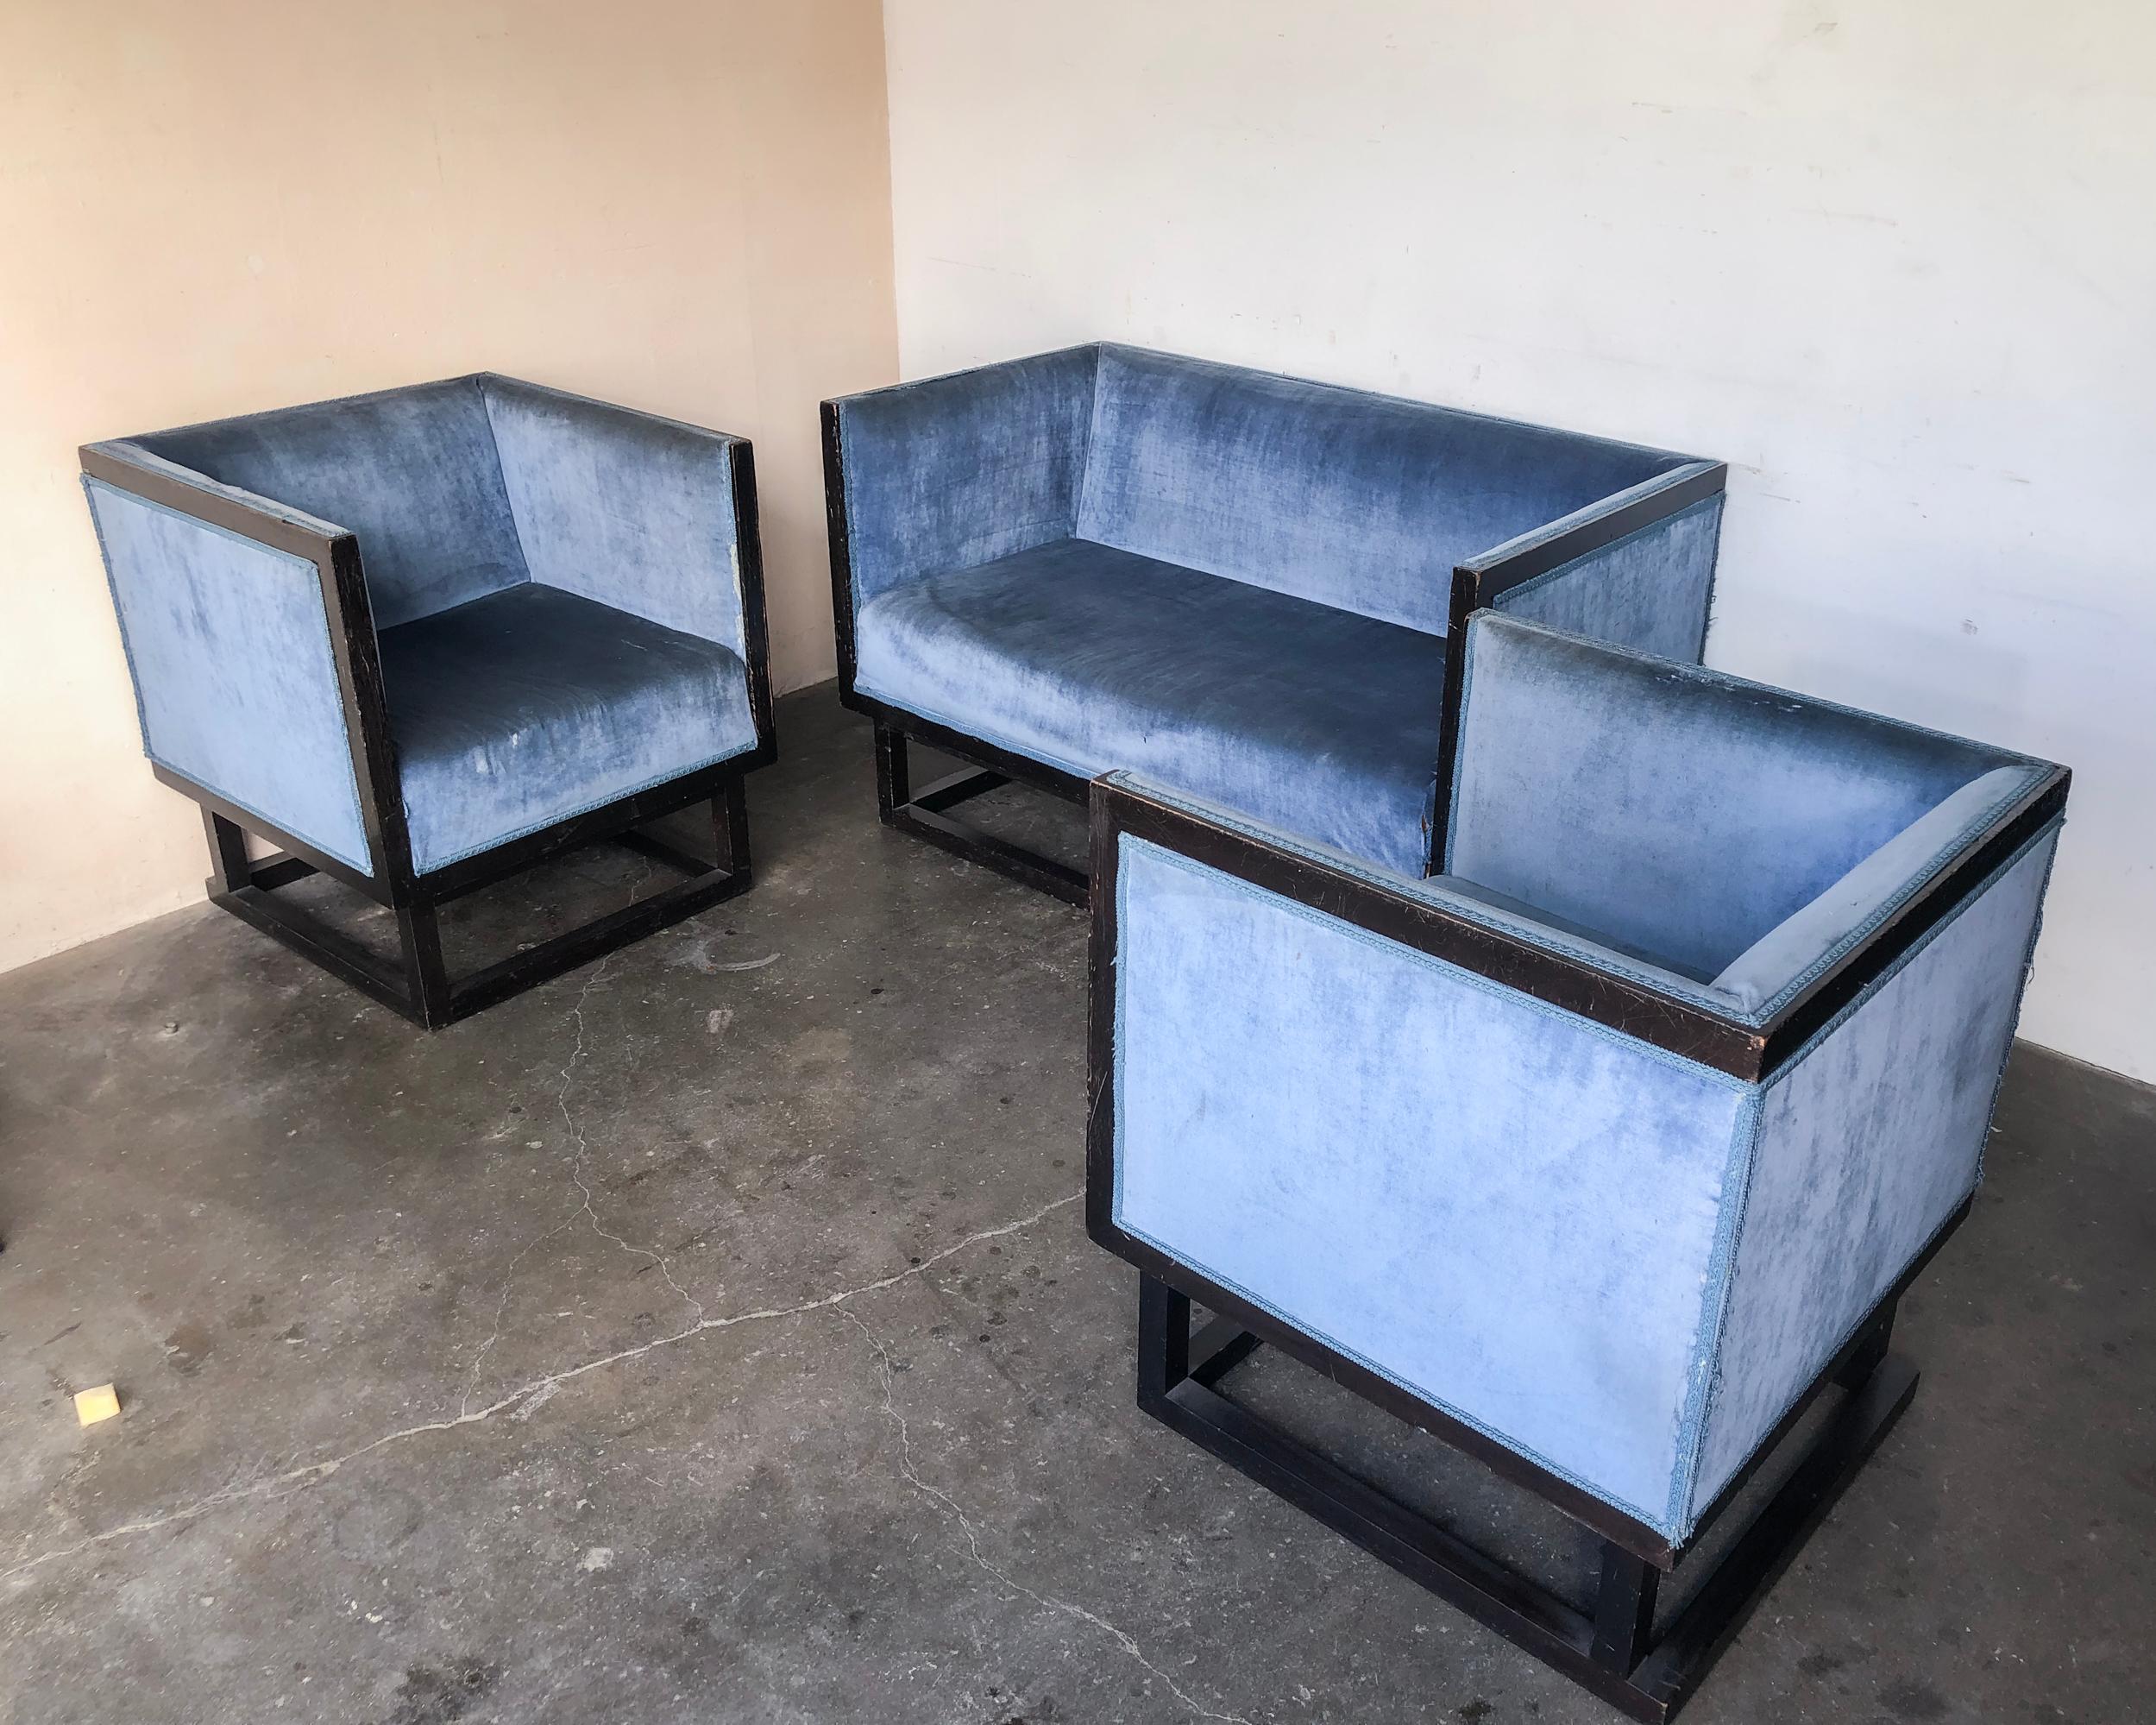 Pair of Rare Josef Hoffmann Cabinet Chairs by Wittmann Austria 1903 For Sale 8